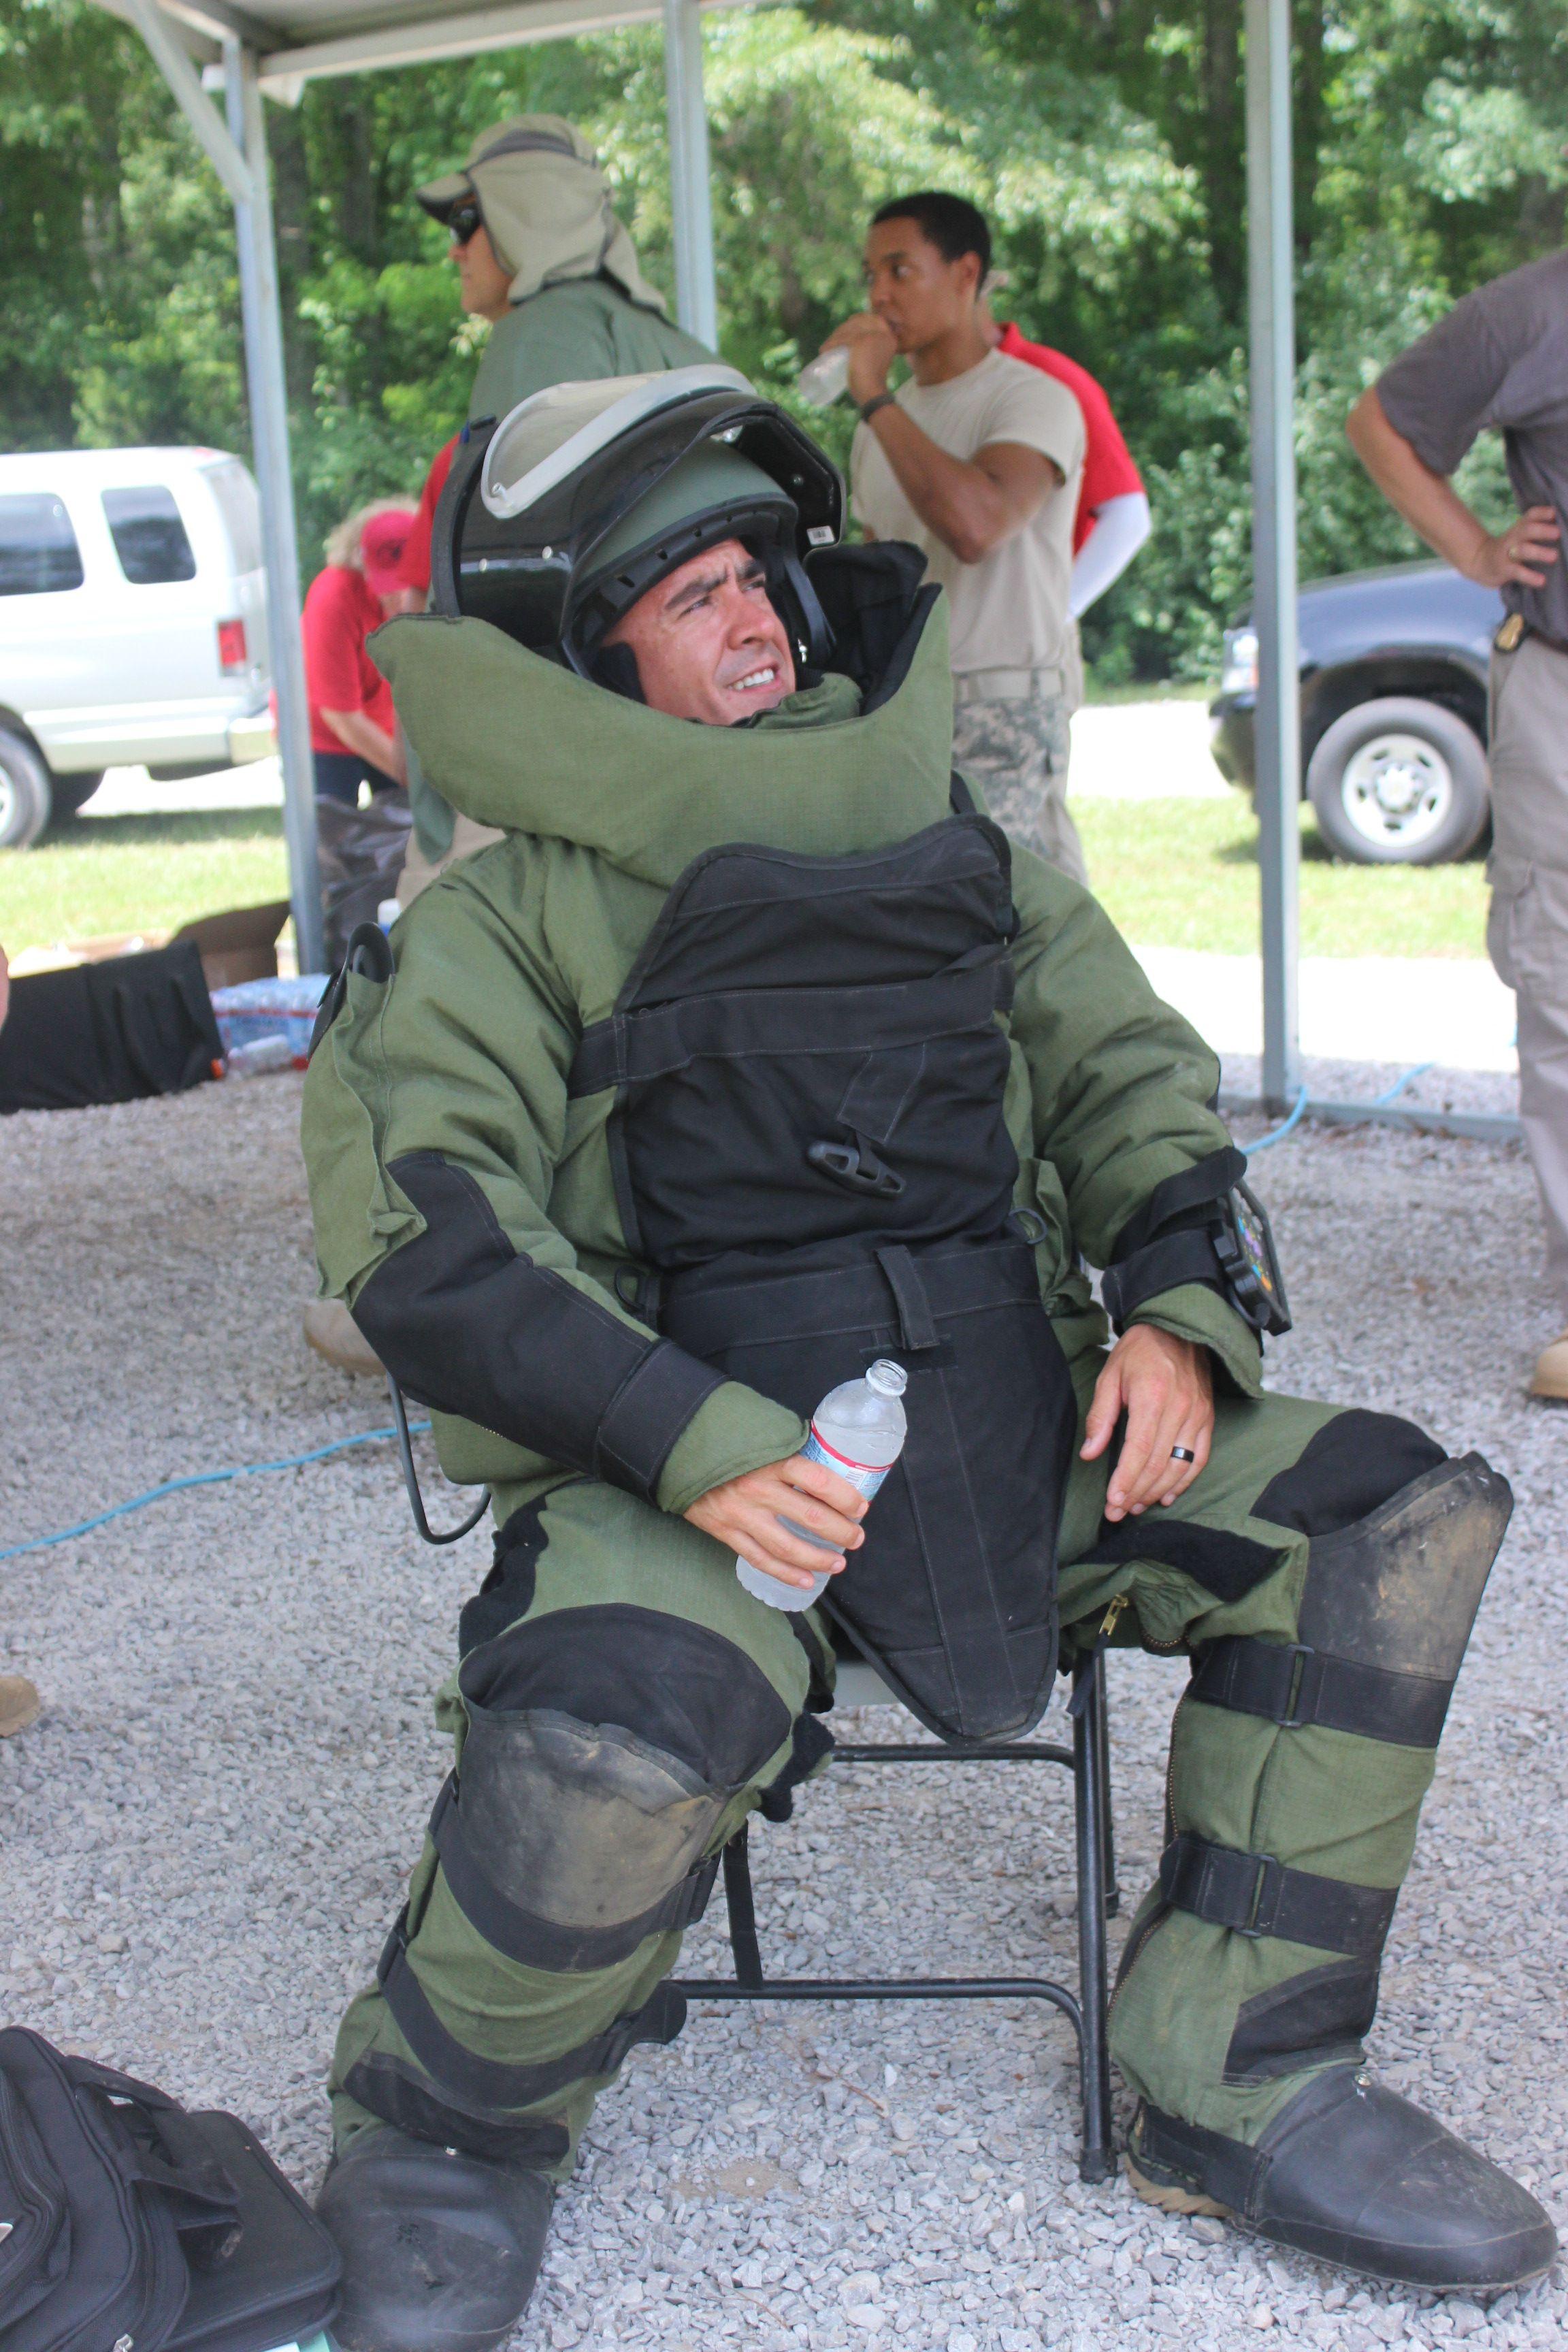 Military Bomb Squad Logo - Civilian, Military Bomb Squads Converge For Exercise. Article